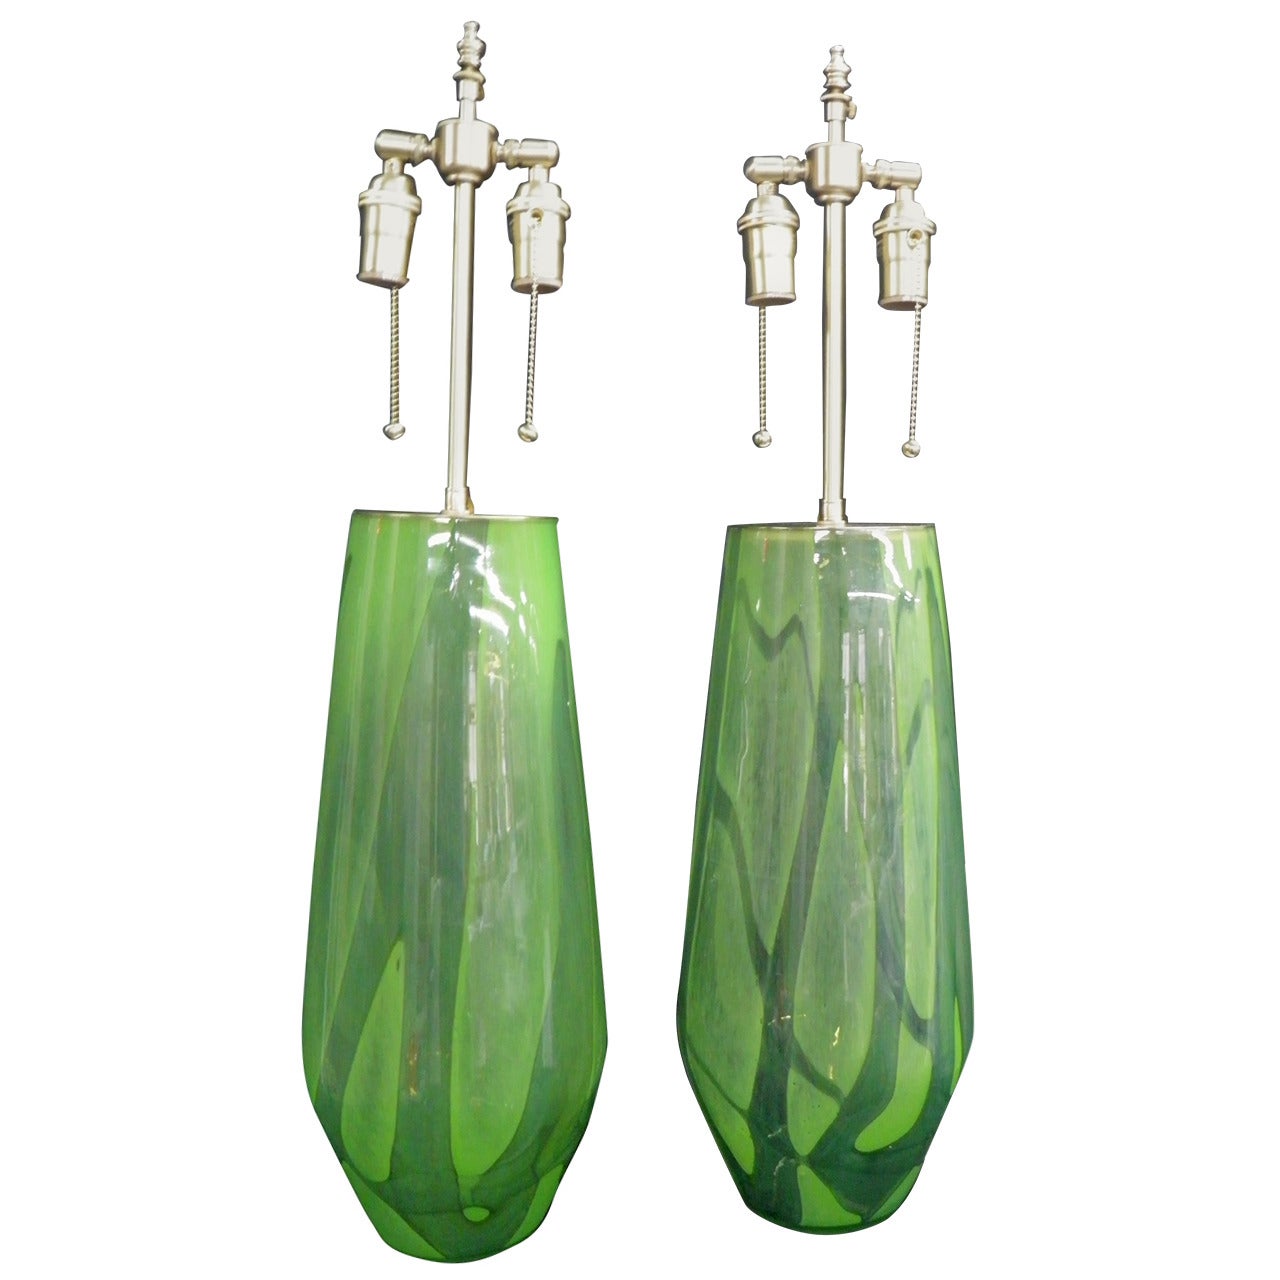 Pair of Large and Unusual Handblown and Painted Glass Vases.